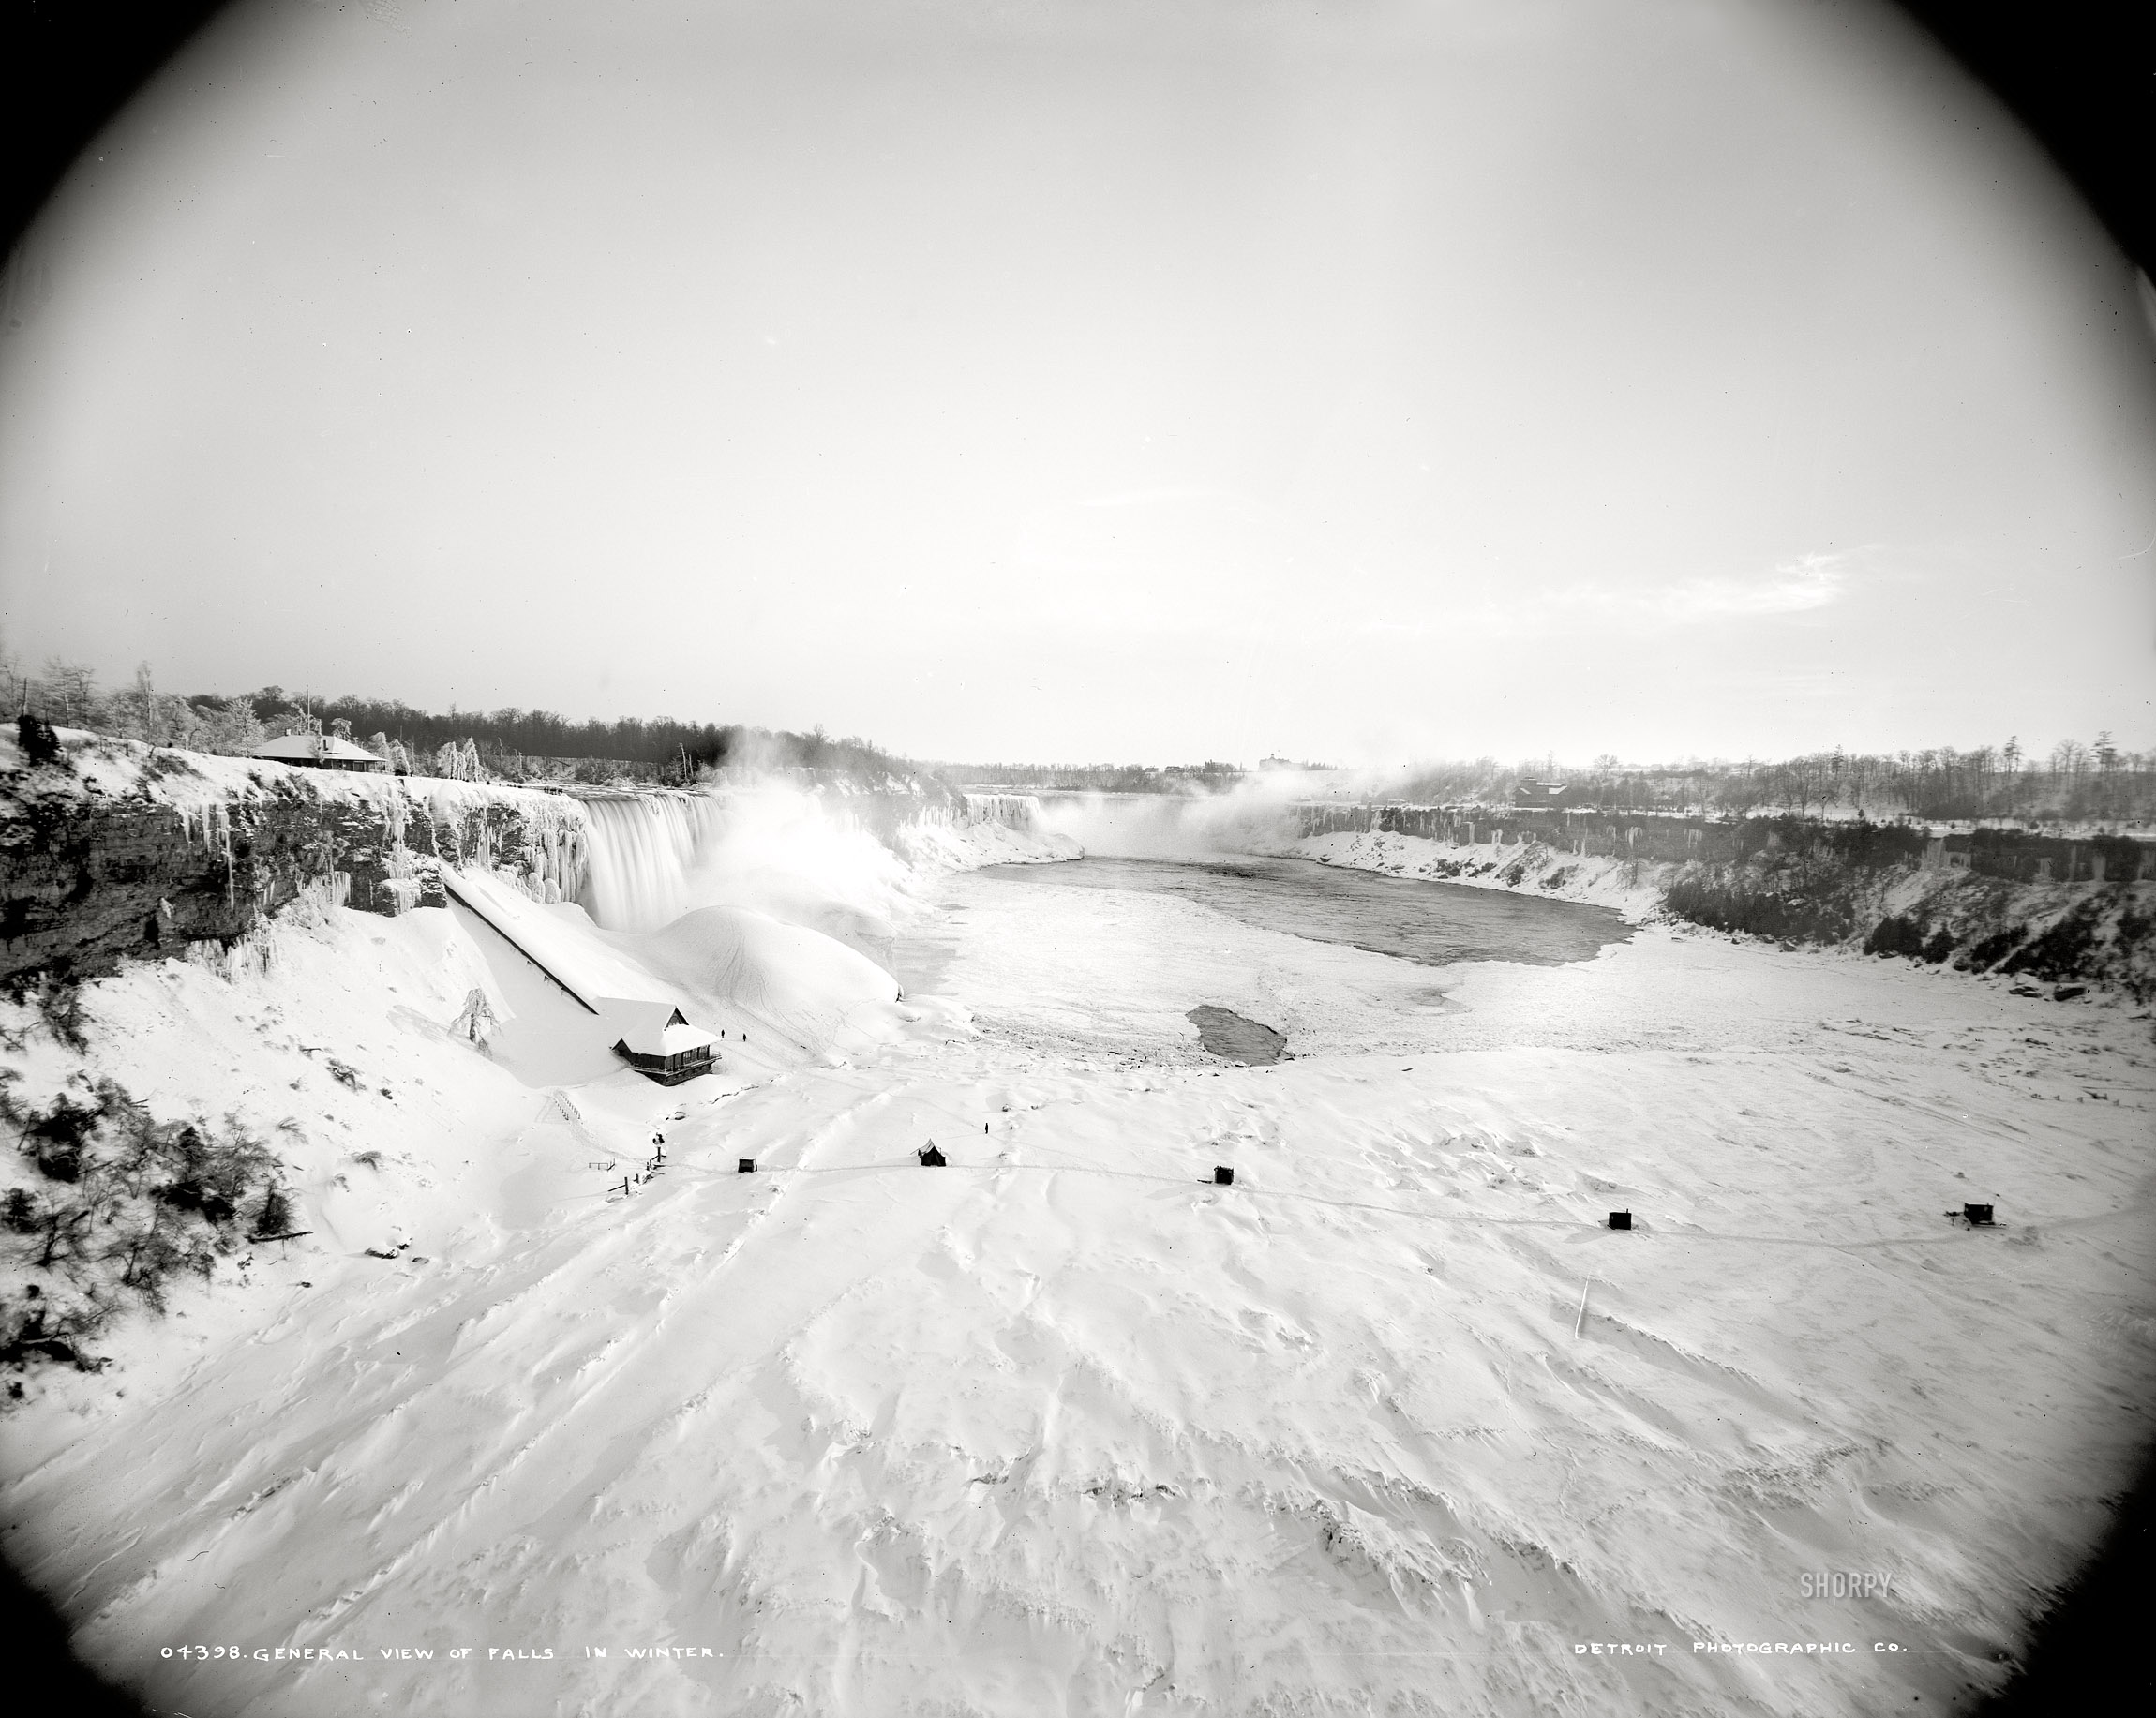 Niagara Falls circa 1900. "General view of falls in winter." 8x10 inch dry plate glass negative, Detroit Publishing Company. View full size.